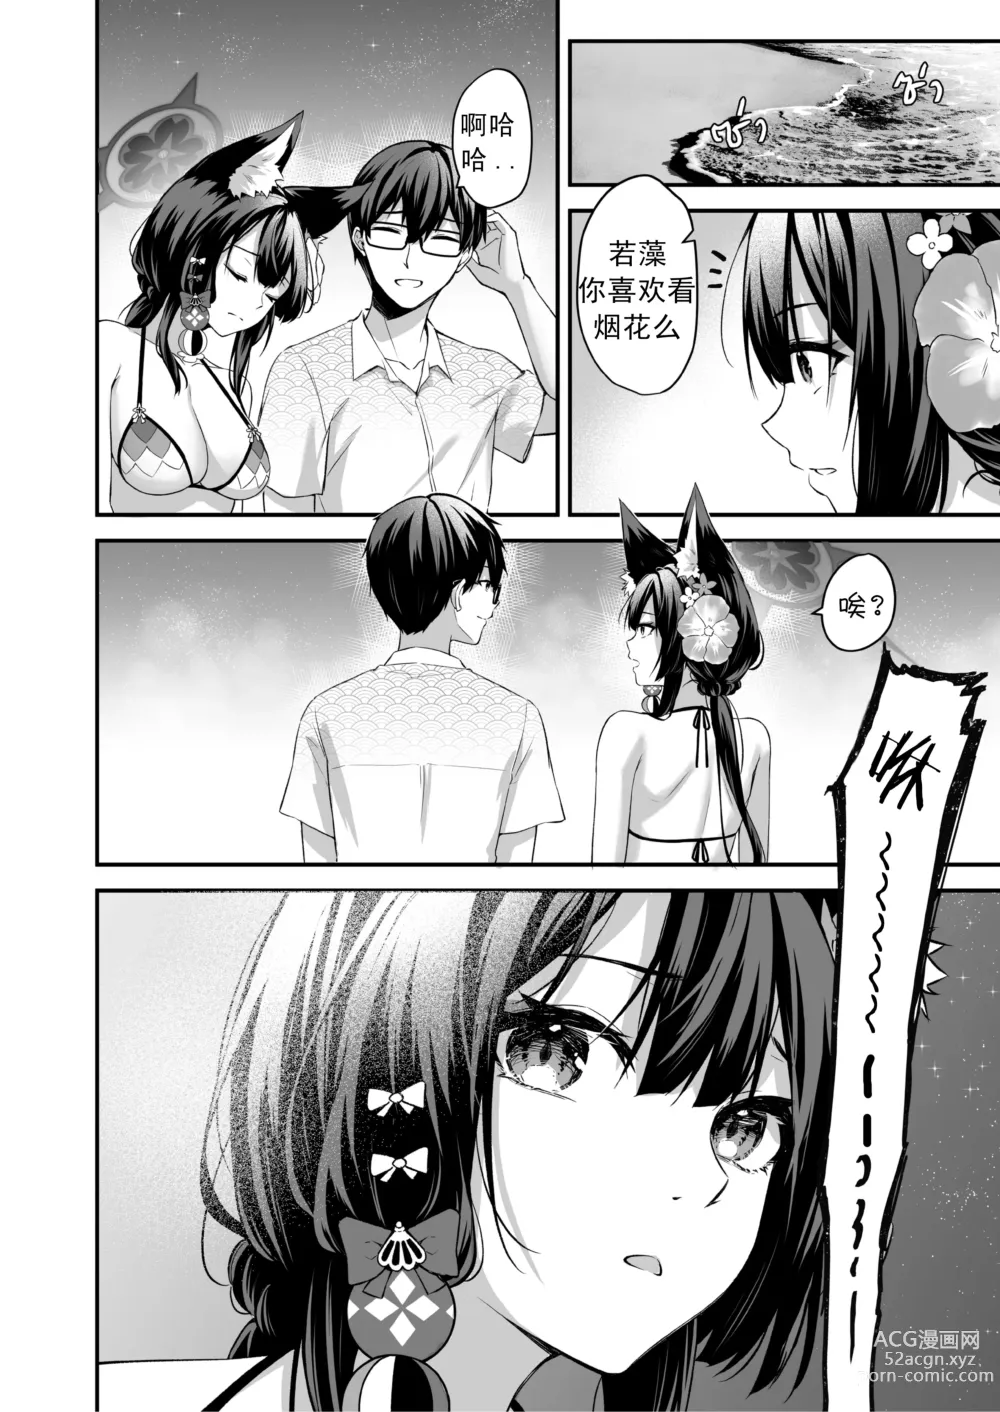 Page 9 of doujinshi OverLove From Wakamo Vol.2 (decensored)